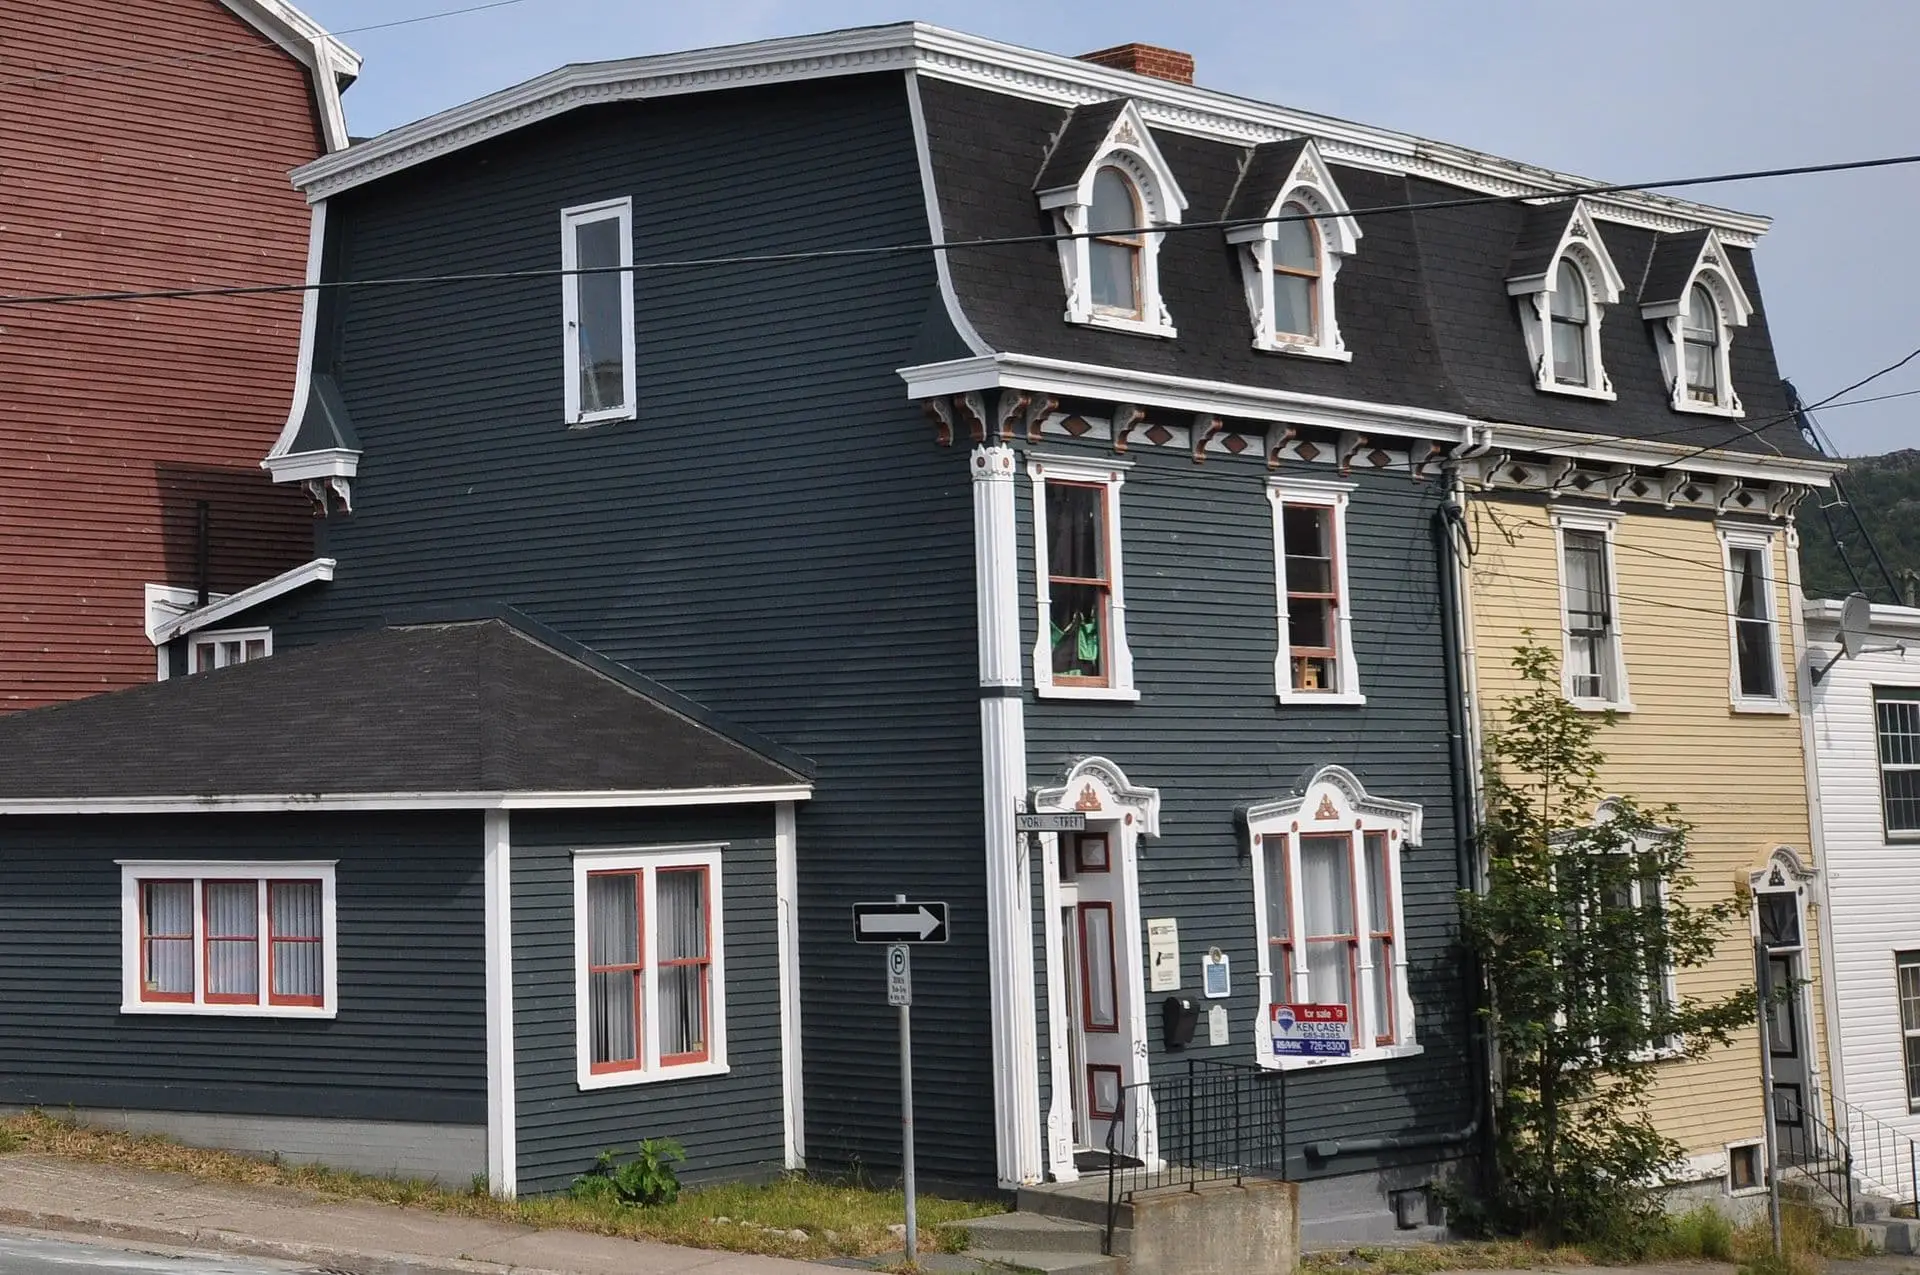 2nd empire style was the most common design Newfoundland architecture in the early 1900's